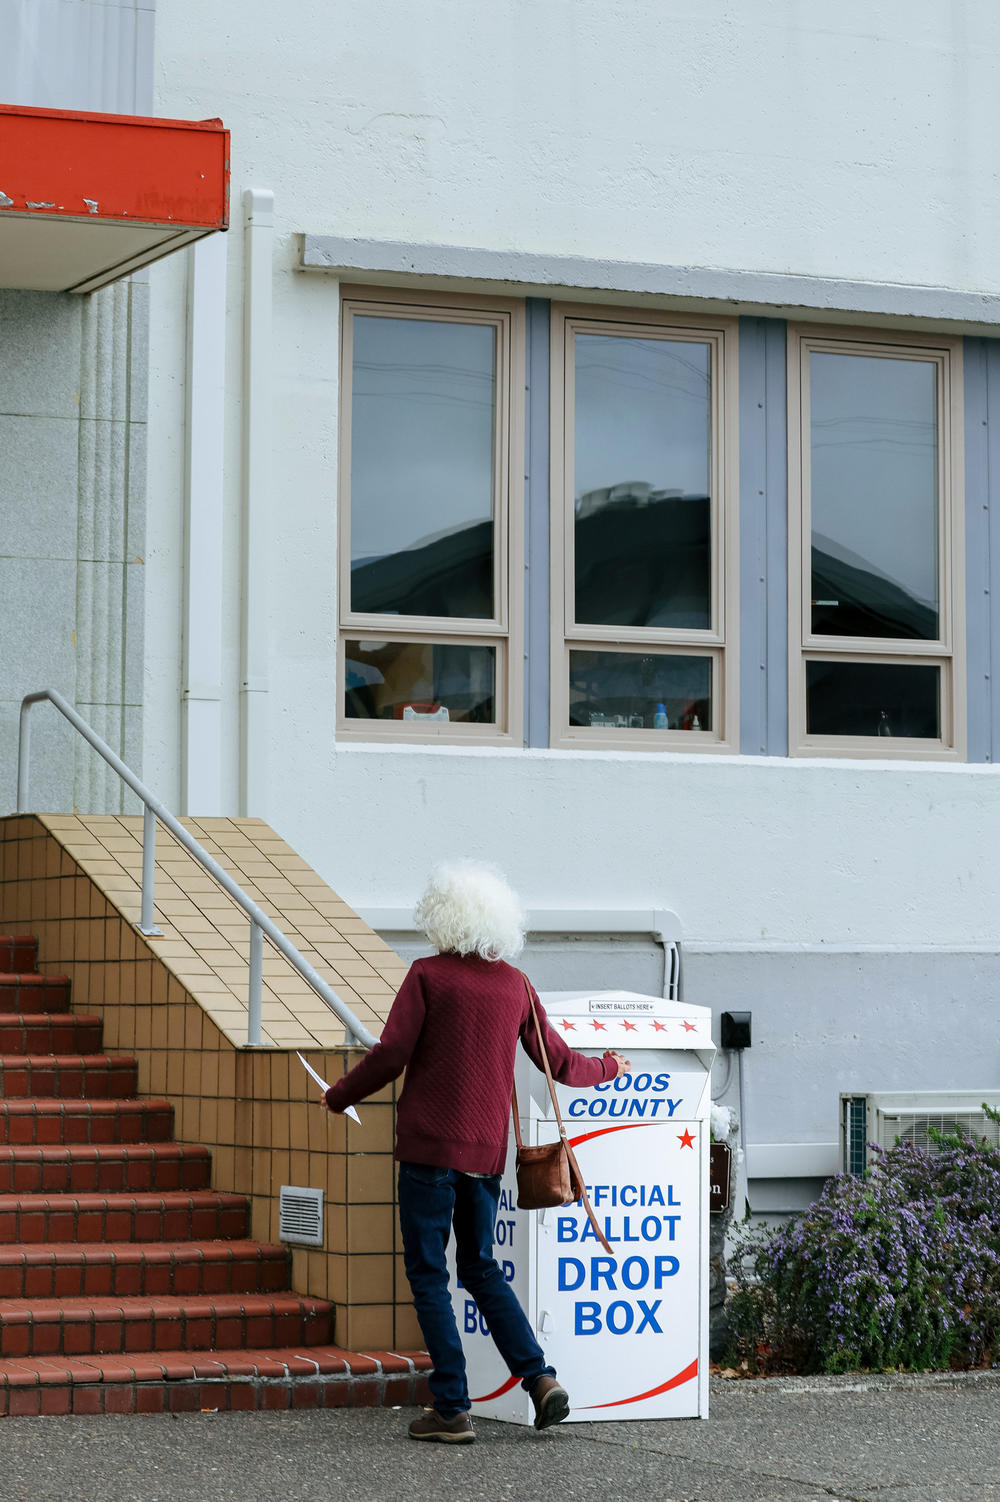 A county resident drops a special election ballot in the box in front of the Coos County Courthouse in Coquille, Ore.